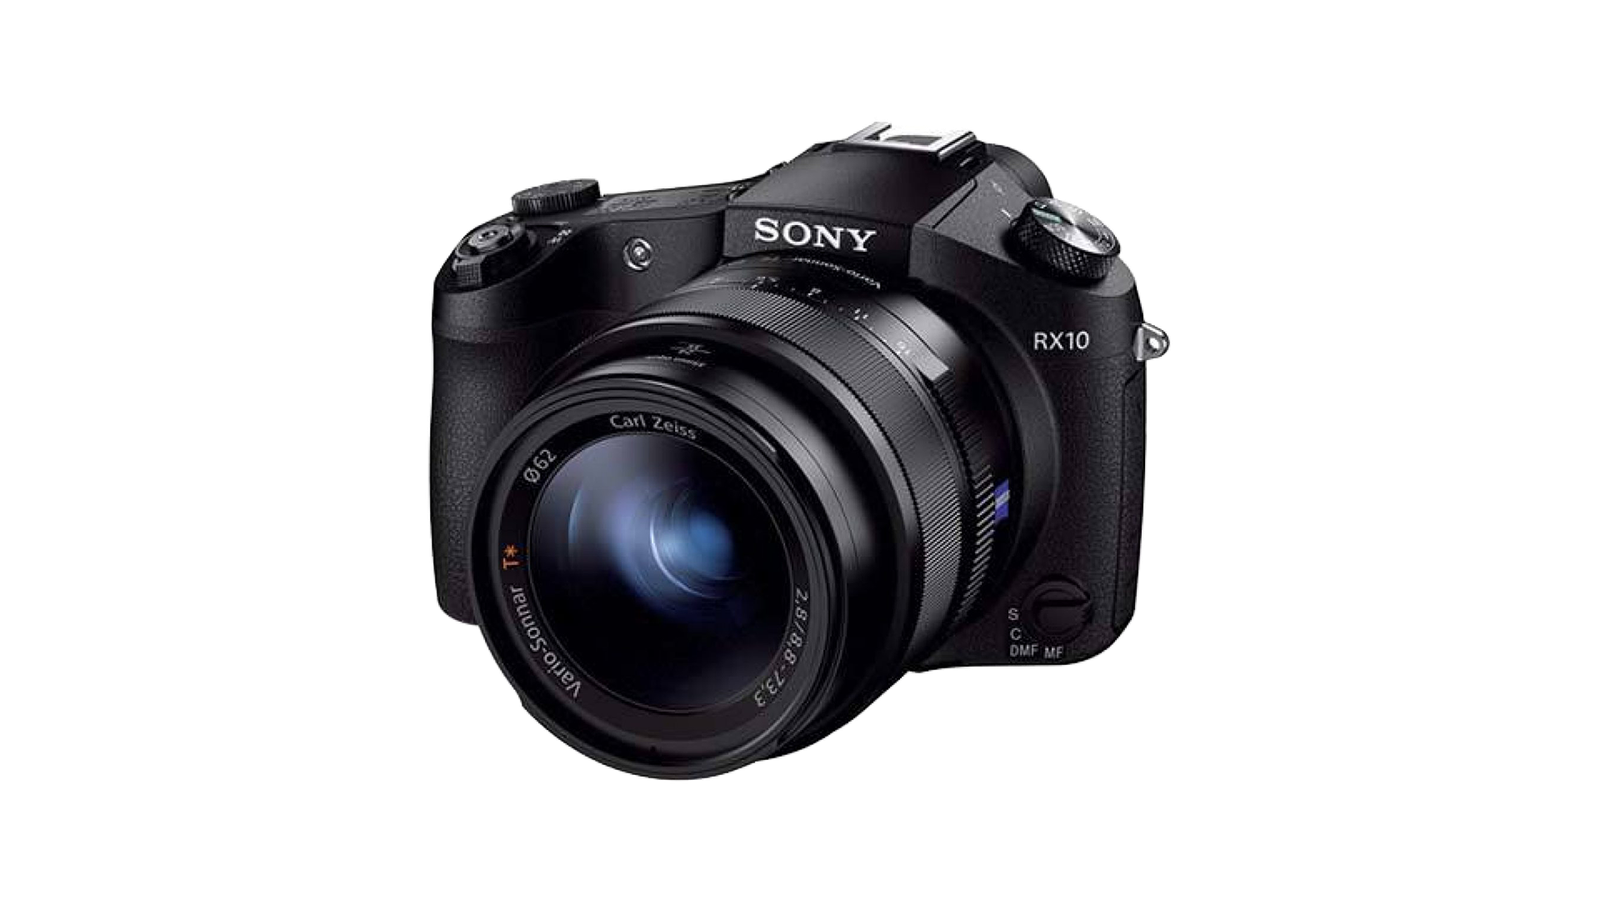 Sony RX10 IV - The best Sony camera for beginners has detailed, quality images